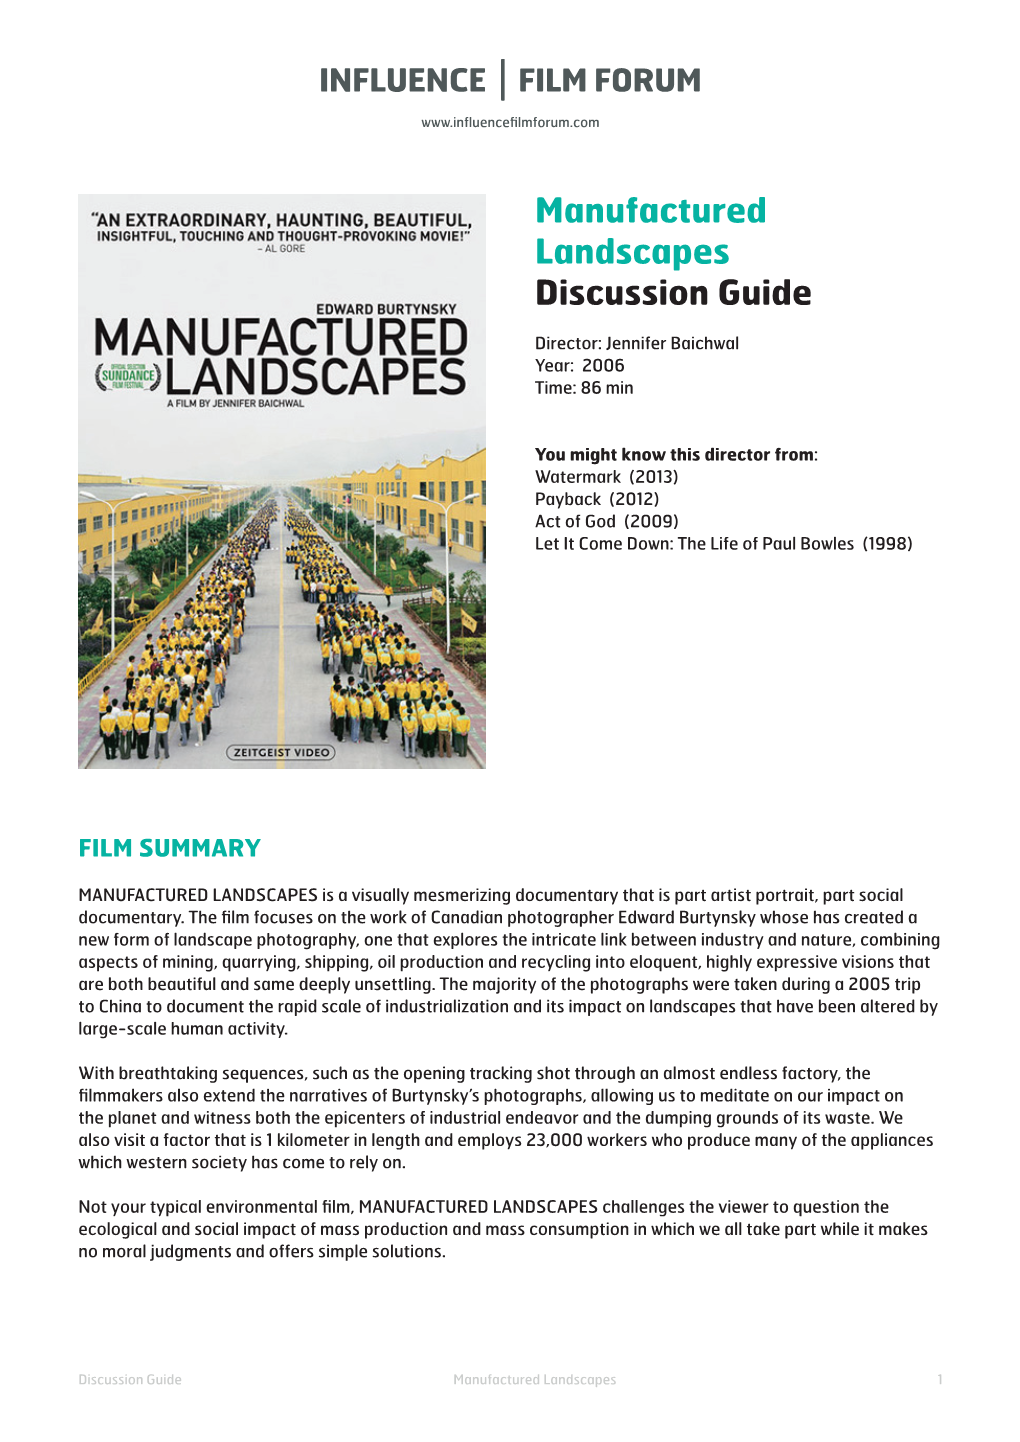 Manufactured Landscapes Discussion Guide